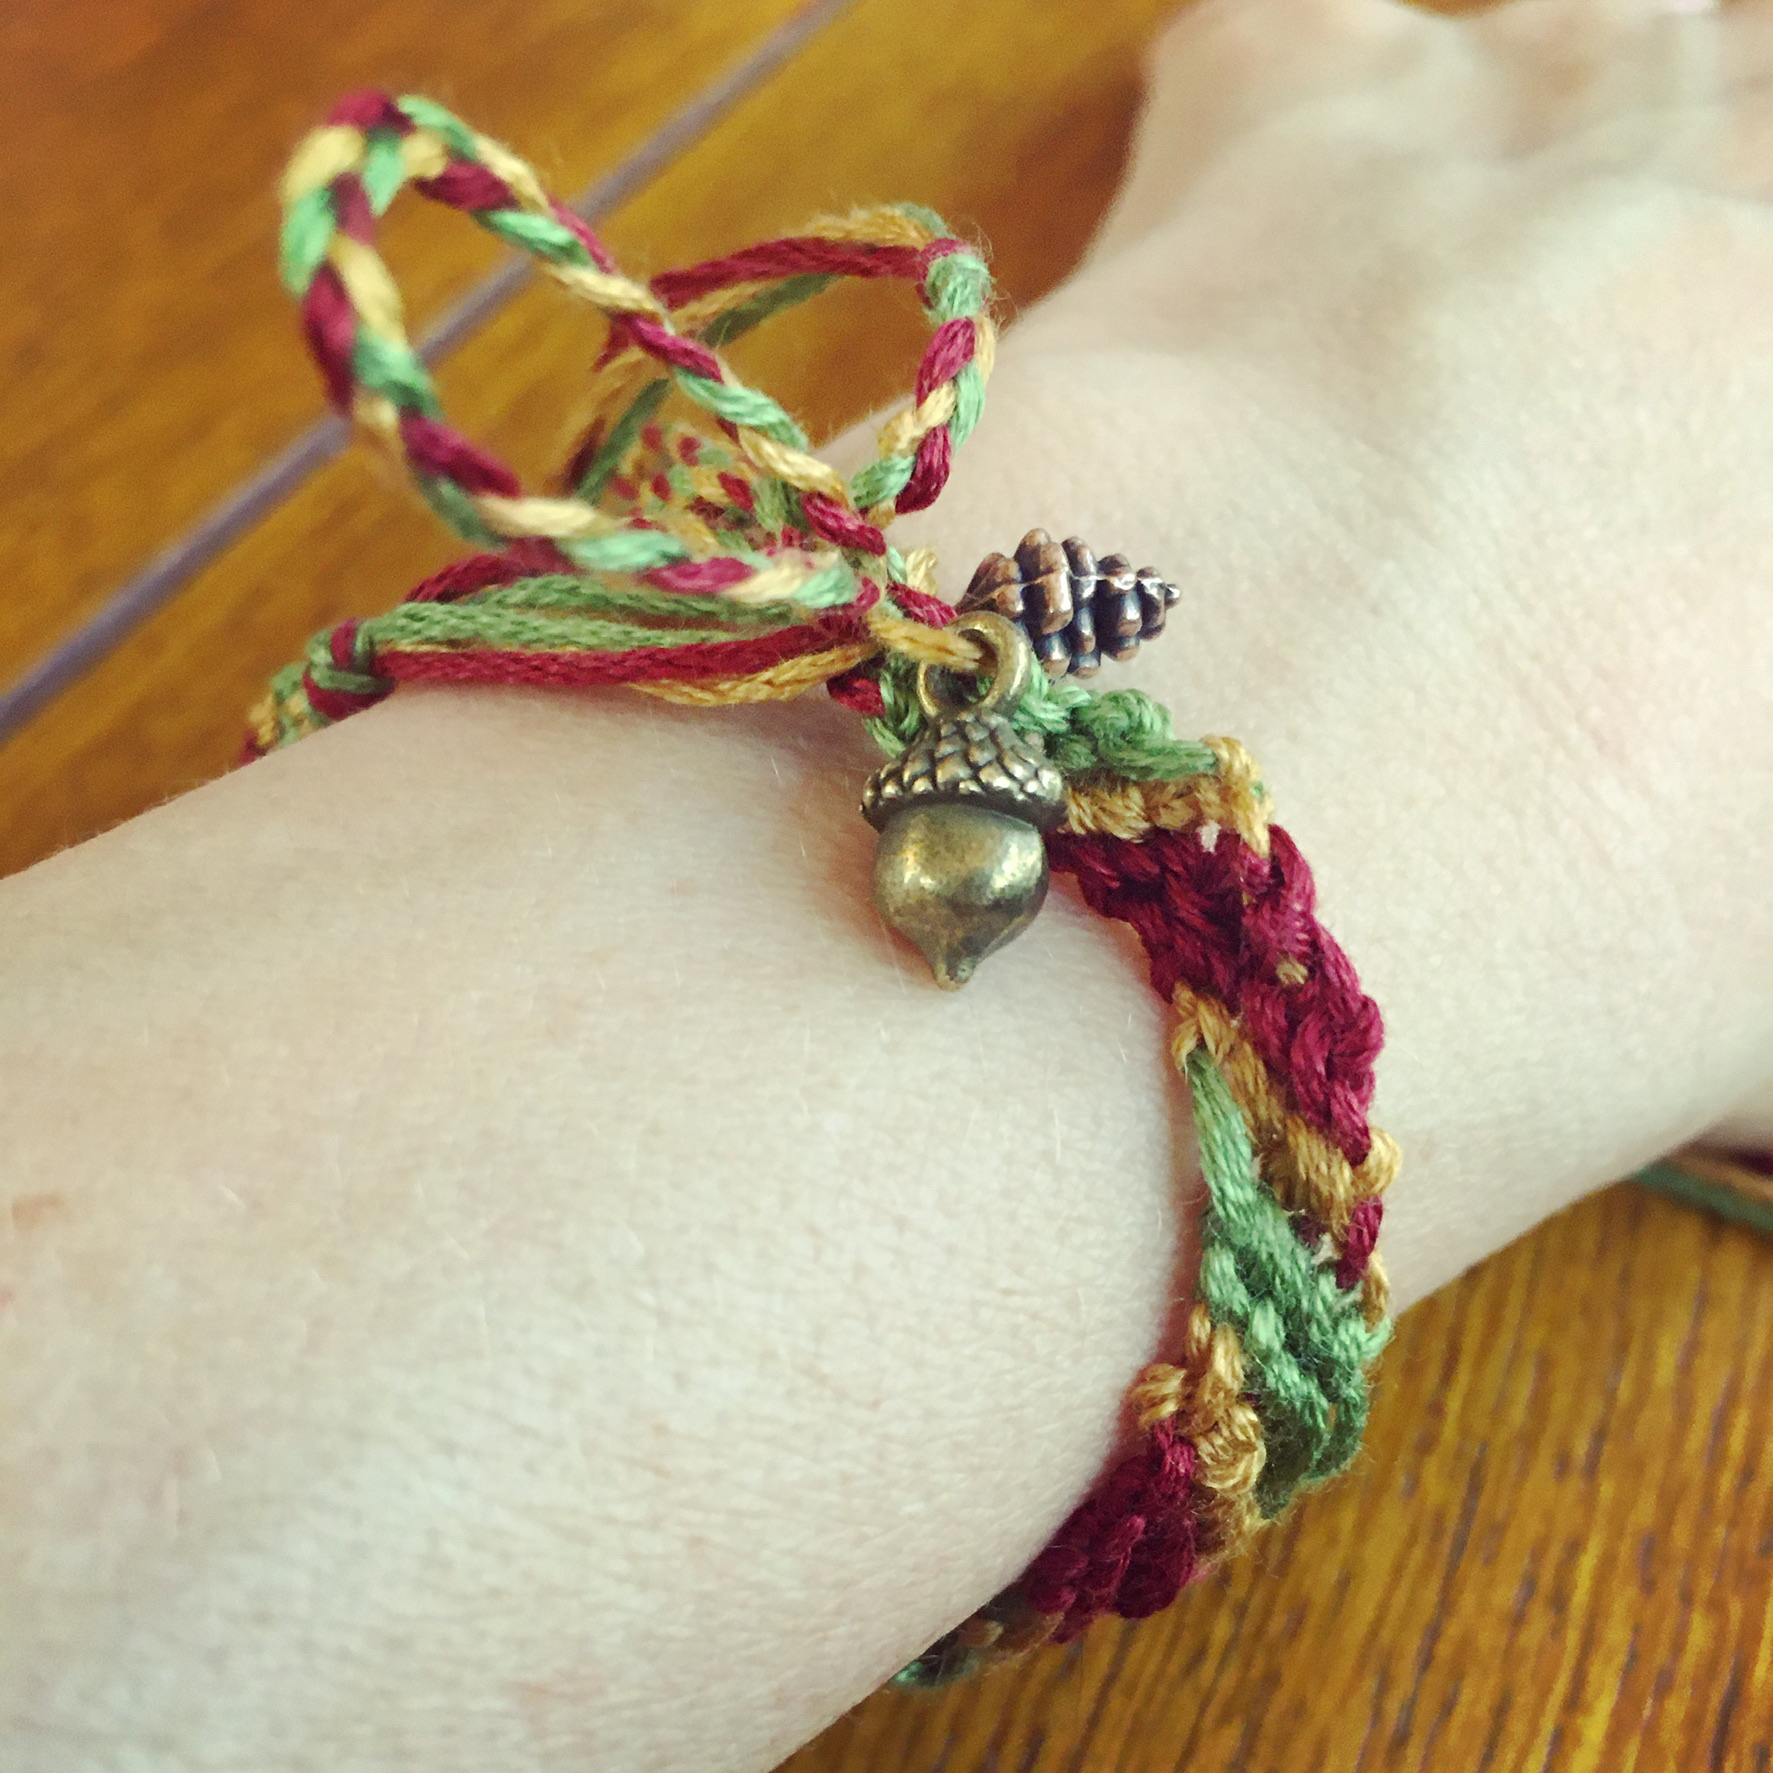 A friendship bracelet made from embroidery floss, with a small metal acorn charm